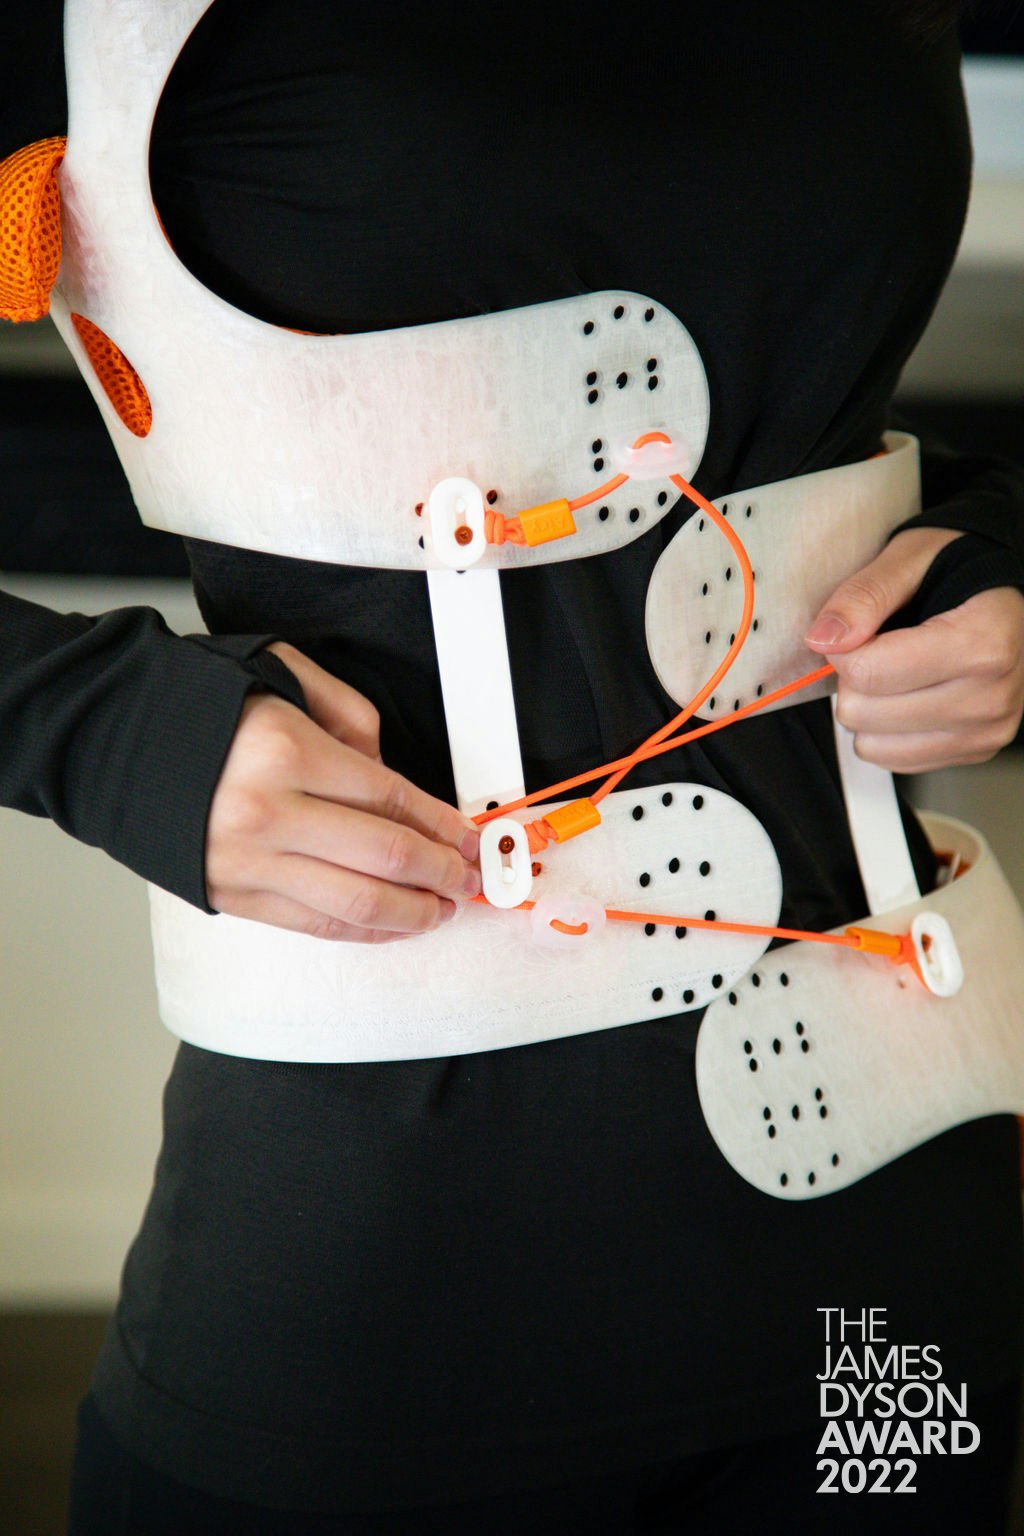 This innovative scoliosis brace 'grows' with its wearer